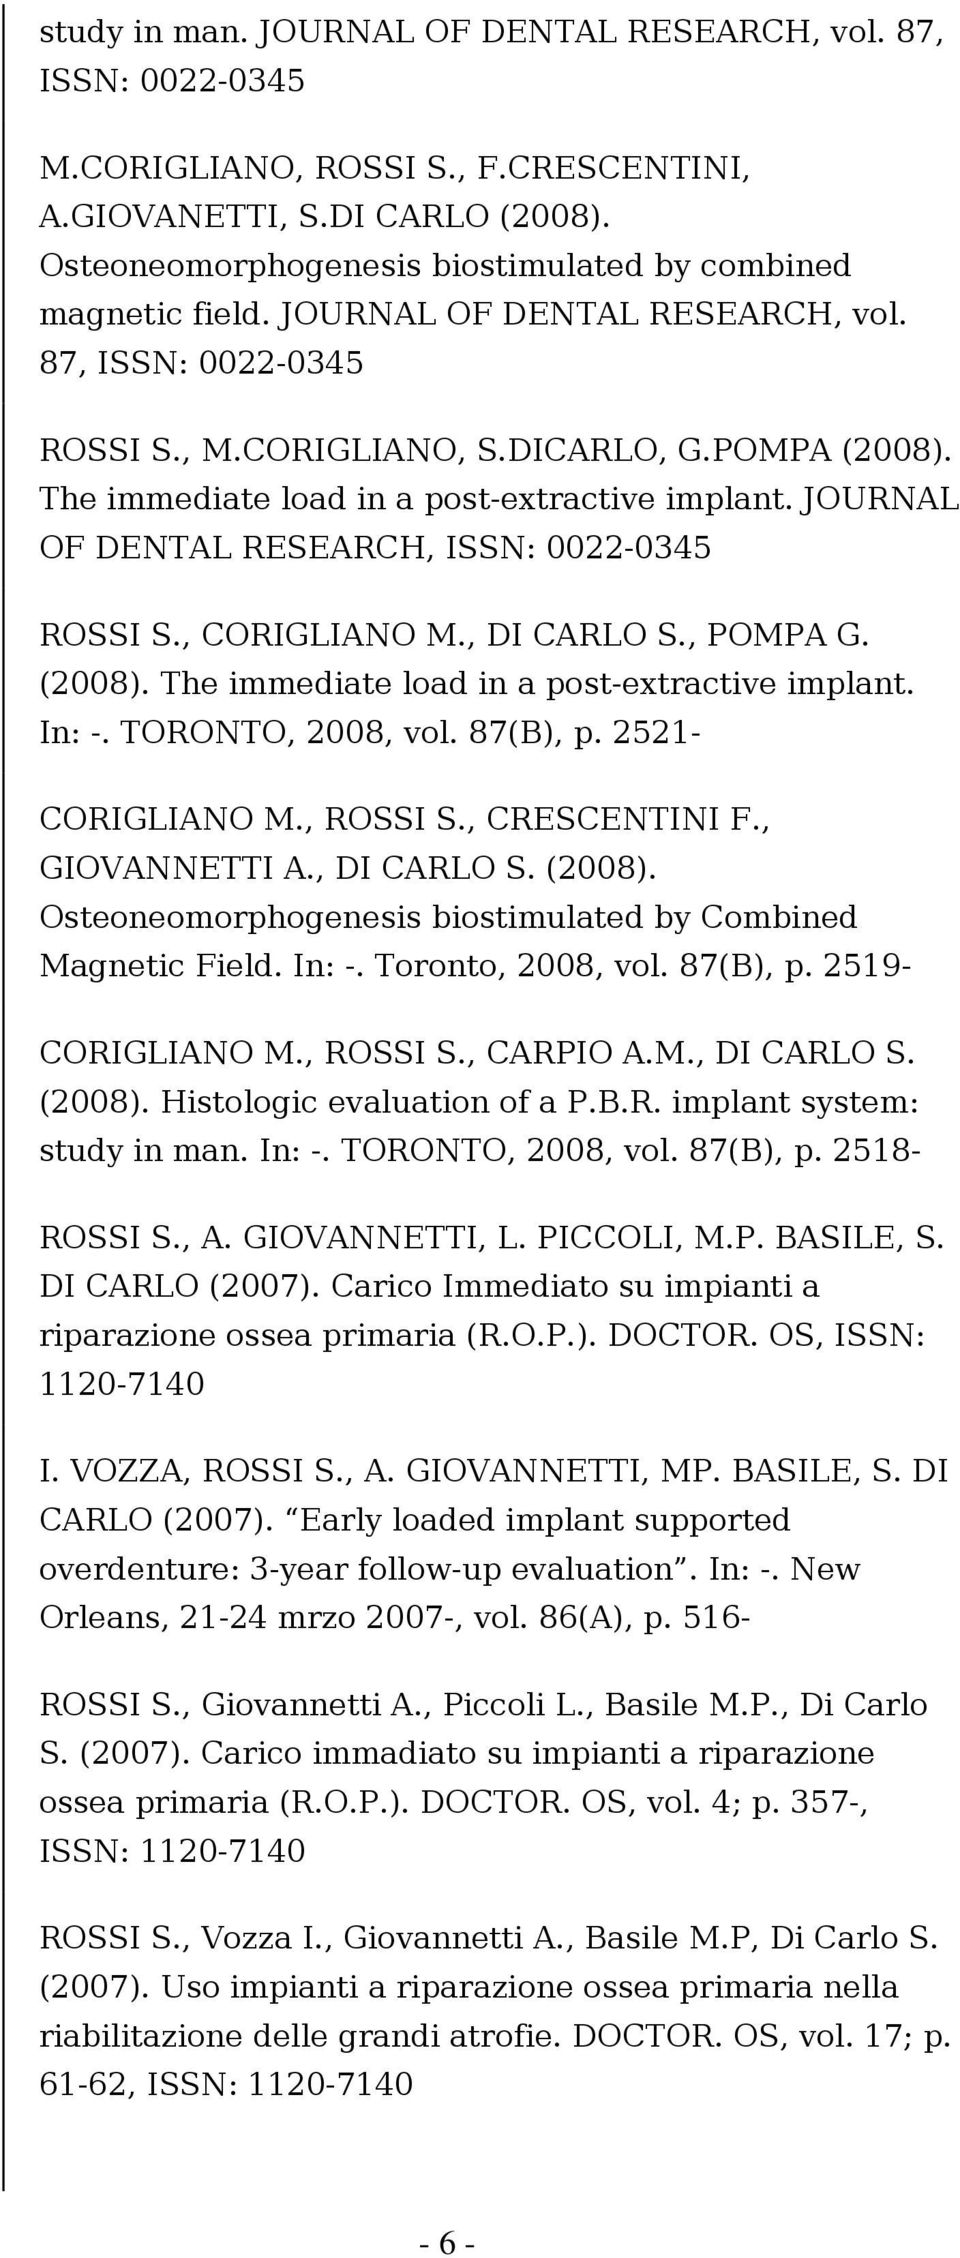 The immediate load in a post-extractive implant. JOURNAL OF DENTAL RESEARCH, ISSN: 0022-0345 ROSSI S., CORIGLIANO M., DI CARLO S., POMPA G. (2008). The immediate load in a post-extractive implant.